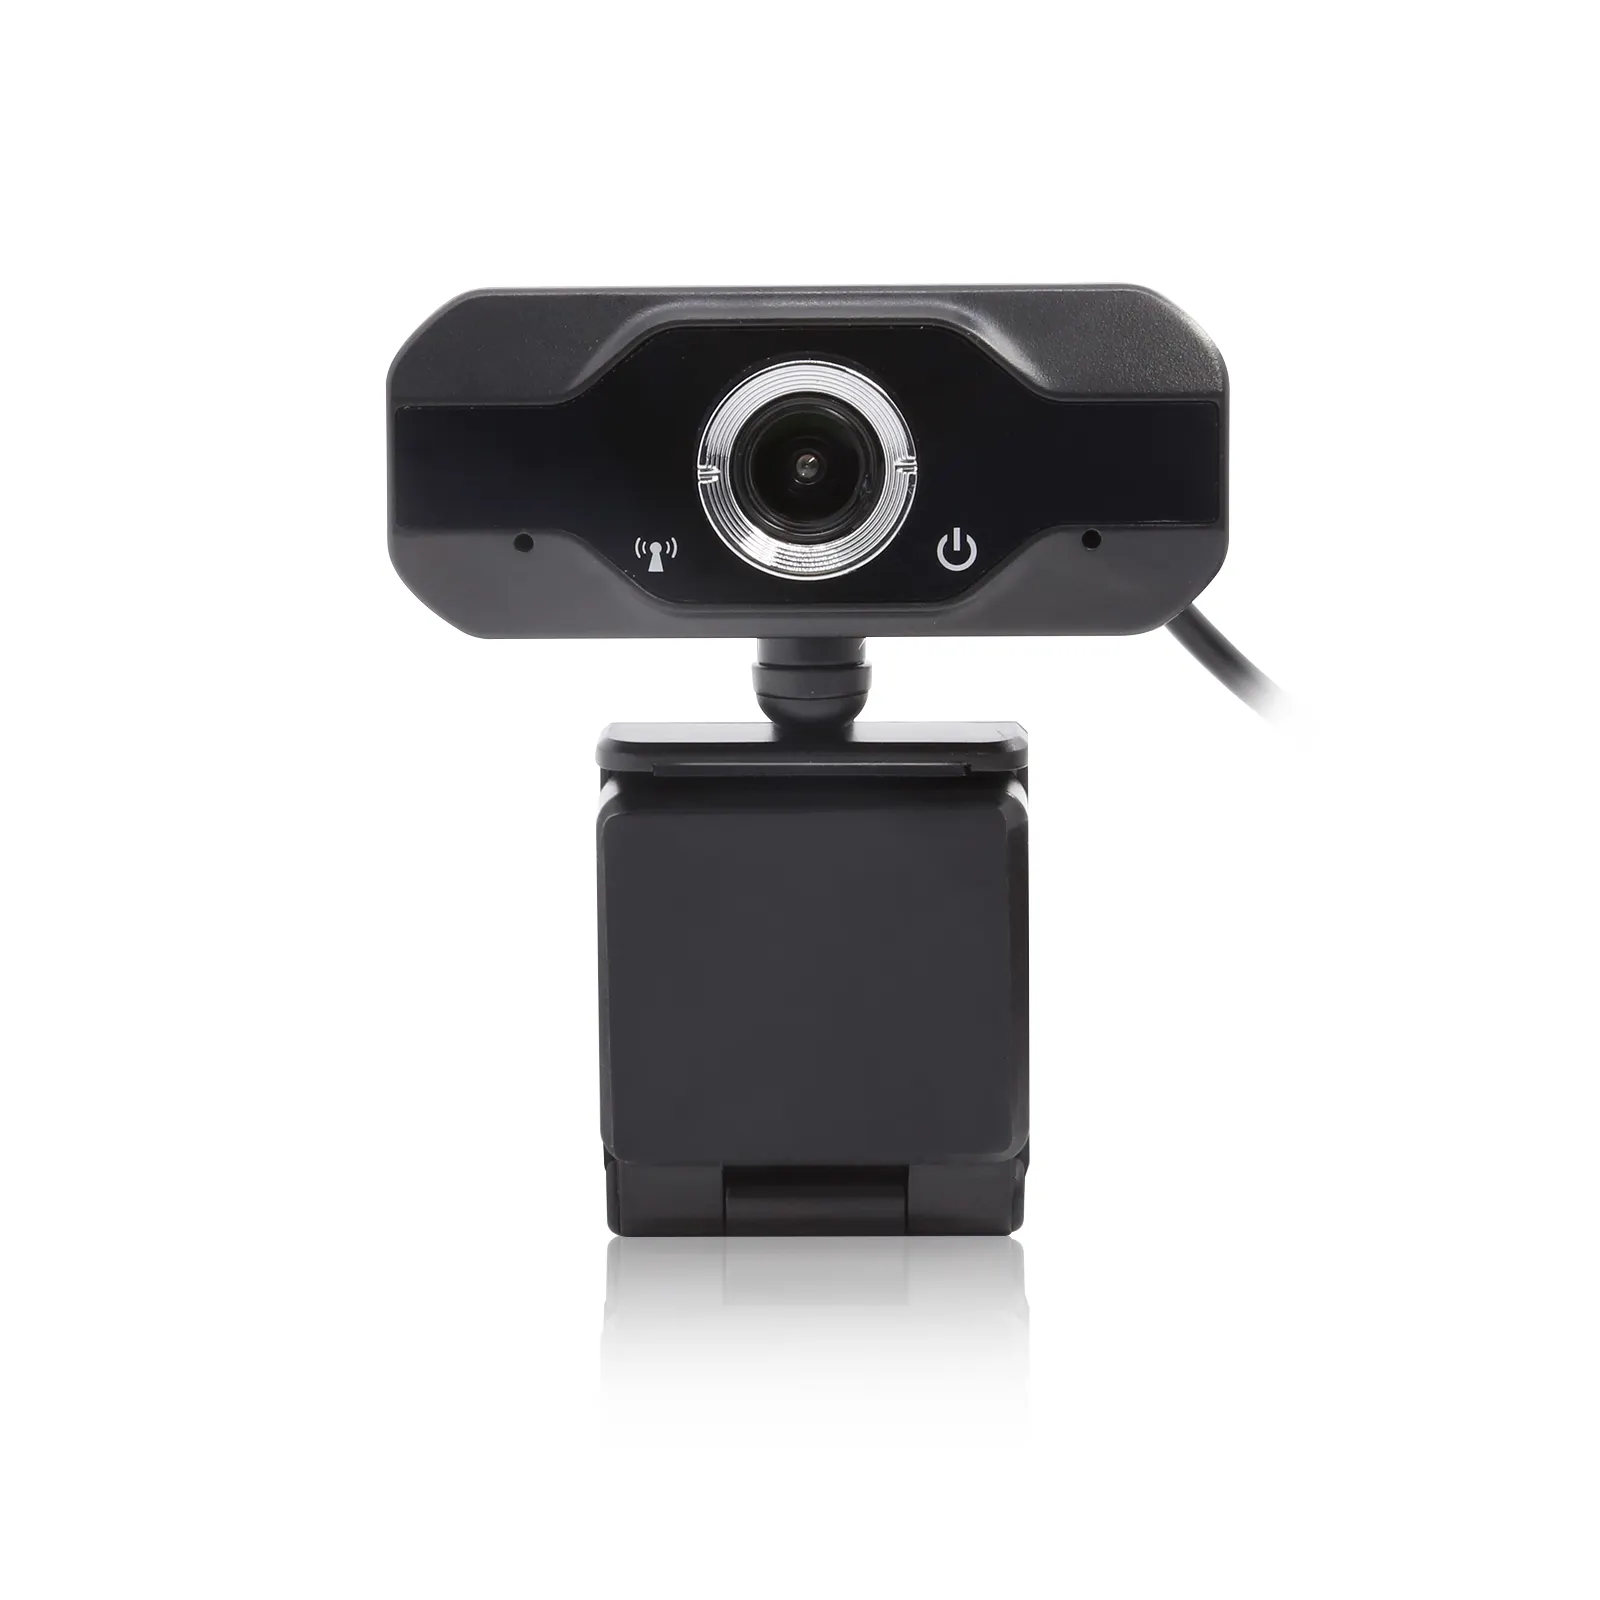 USB2.0 Plug and play 720P Highly sensitive pickup HD PC Web Camera for Video conference teaching online course